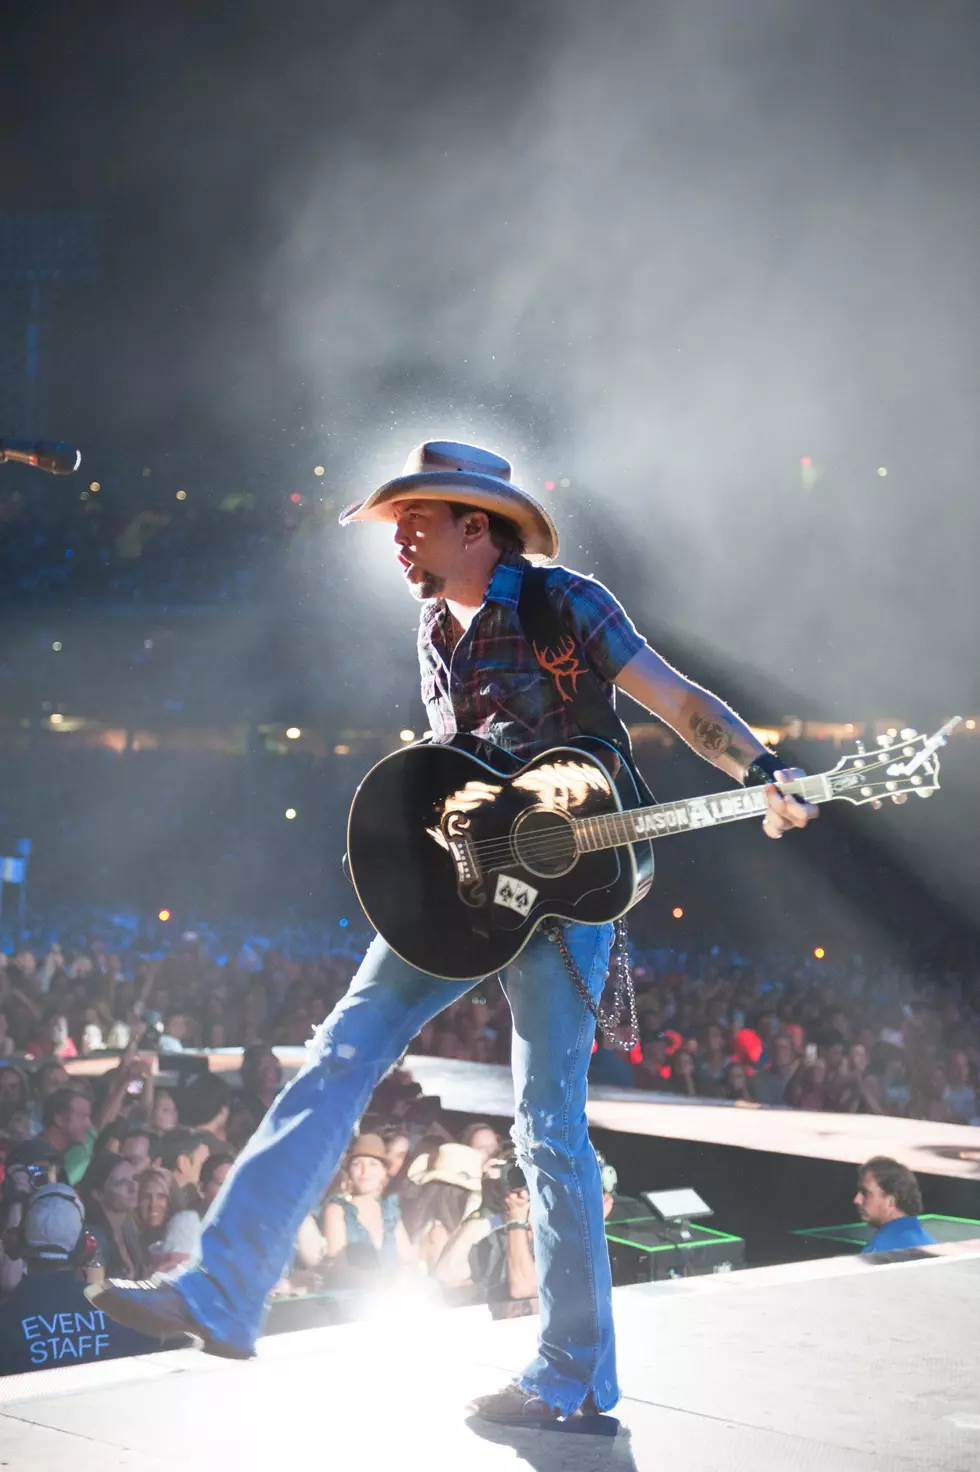 JUST ANNOUNCED&#8230;JASON ALDEAN AT PALACE!!!